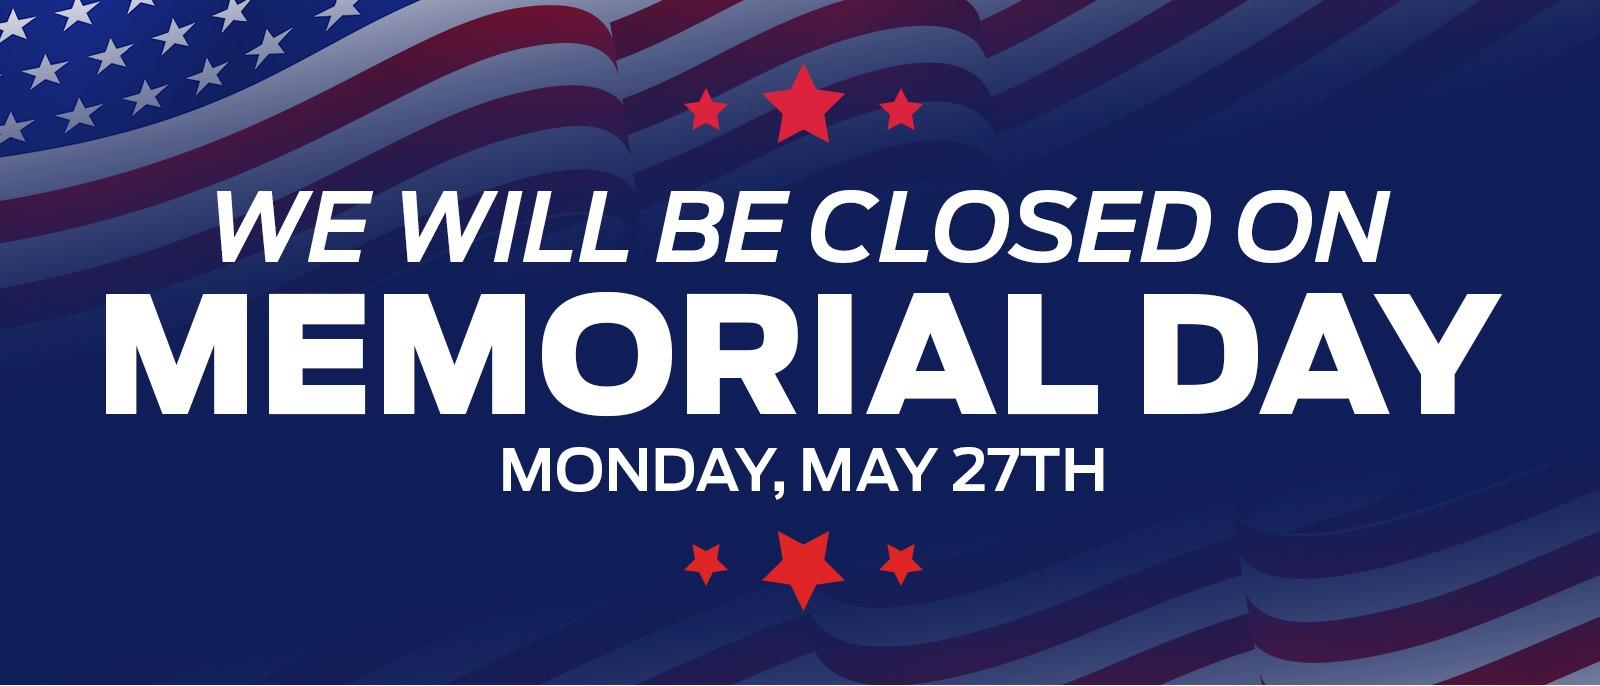 closed on memorial day